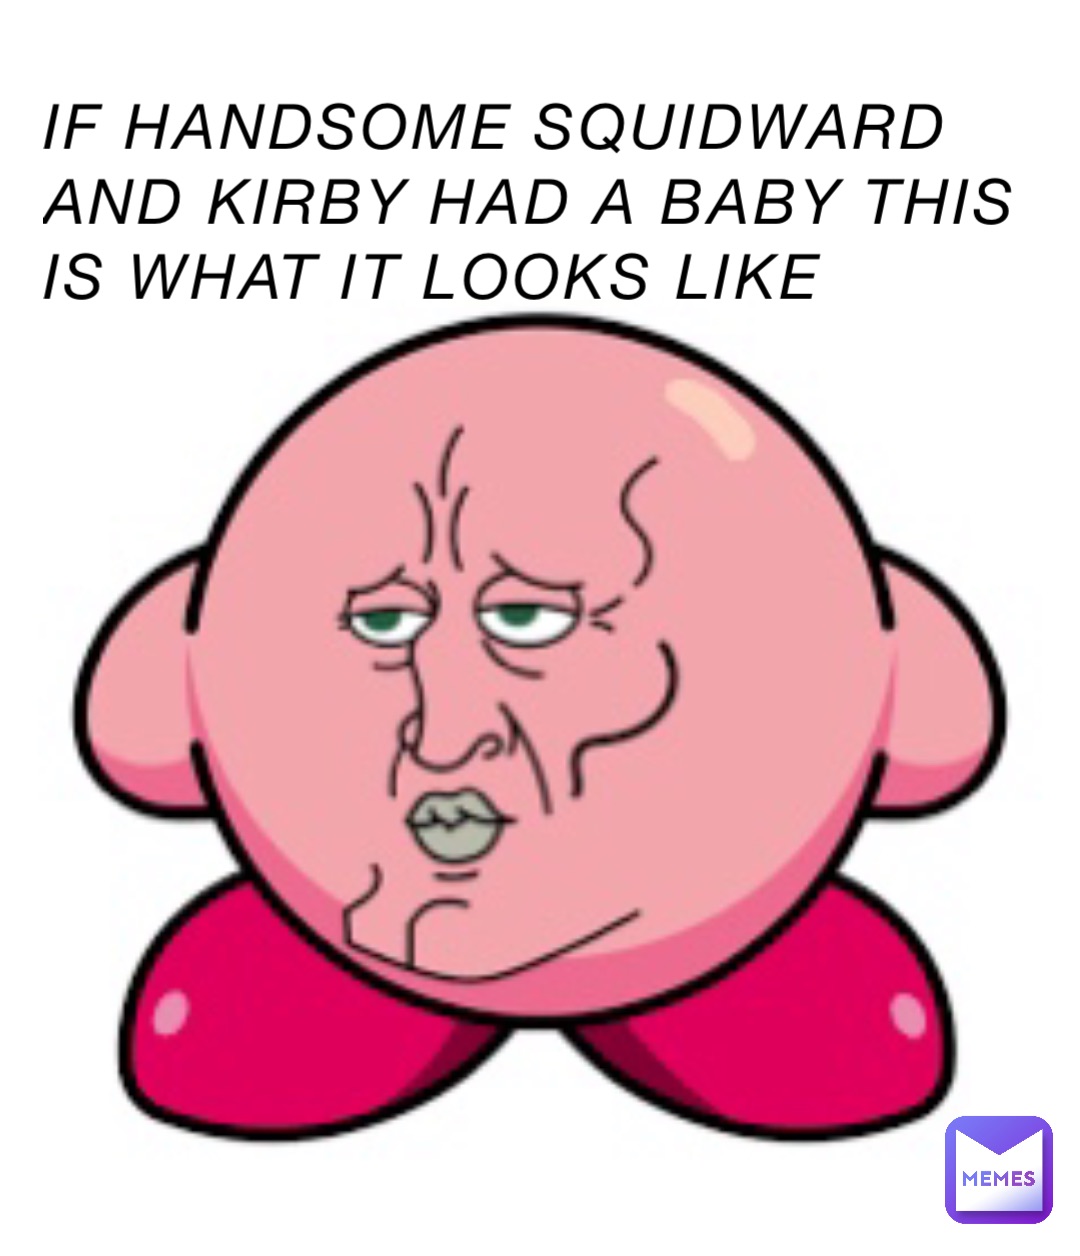 if handsome squidward and kirby had a baby this is what it looks like